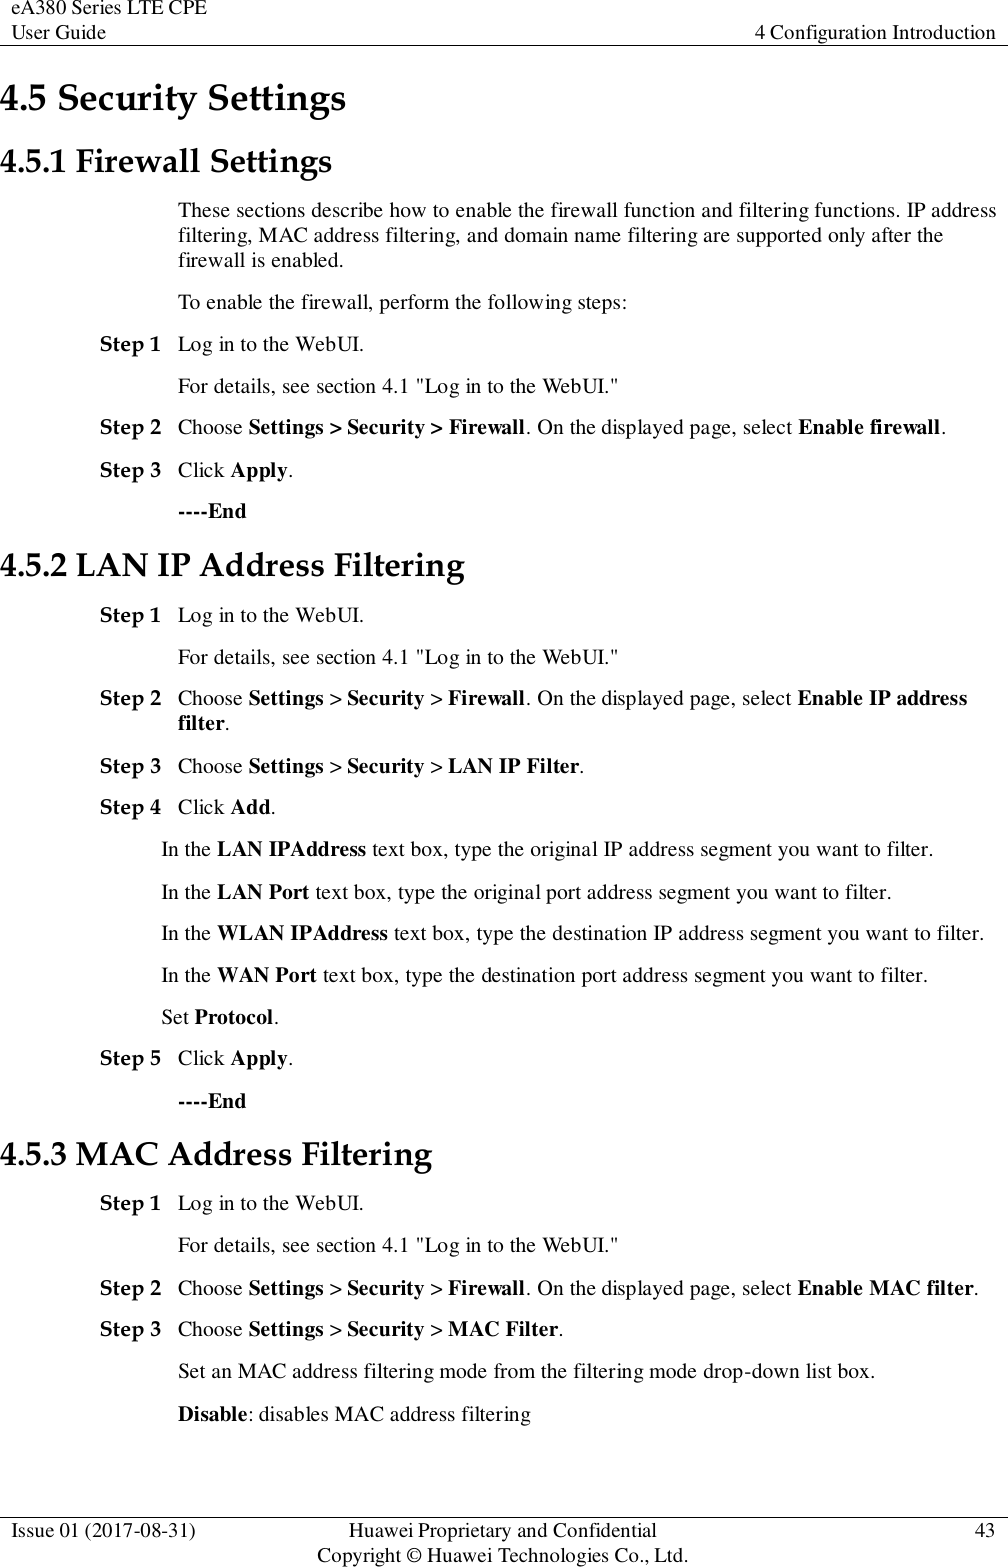 eA380 Series LTE CPE User Guide 4 Configuration Introduction  Issue 01 (2017-08-31) Huawei Proprietary and Confidential                                     Copyright © Huawei Technologies Co., Ltd. 43  4.5 Security Settings 4.5.1 Firewall Settings These sections describe how to enable the firewall function and filtering functions. IP address filtering, MAC address filtering, and domain name filtering are supported only after the firewall is enabled.   To enable the firewall, perform the following steps:   Step 1 Log in to the WebUI. For details, see section 4.1 &quot;Log in to the WebUI.&quot; Step 2 Choose Settings &gt; Security &gt; Firewall. On the displayed page, select Enable firewall.   Step 3 Click Apply. ----End 4.5.2 LAN IP Address Filtering Step 1 Log in to the WebUI. For details, see section 4.1 &quot;Log in to the WebUI.&quot; Step 2 Choose Settings &gt; Security &gt; Firewall. On the displayed page, select Enable IP address filter.   Step 3 Choose Settings &gt; Security &gt; LAN IP Filter. Step 4 Click Add. In the LAN IPAddress text box, type the original IP address segment you want to filter. In the LAN Port text box, type the original port address segment you want to filter. In the WLAN IPAddress text box, type the destination IP address segment you want to filter. In the WAN Port text box, type the destination port address segment you want to filter. Set Protocol. Step 5 Click Apply. ----End 4.5.3 MAC Address Filtering Step 1 Log in to the WebUI. For details, see section 4.1 &quot;Log in to the WebUI.&quot; Step 2 Choose Settings &gt; Security &gt; Firewall. On the displayed page, select Enable MAC filter. Step 3 Choose Settings &gt; Security &gt; MAC Filter.   Set an MAC address filtering mode from the filtering mode drop-down list box. Disable: disables MAC address filtering   